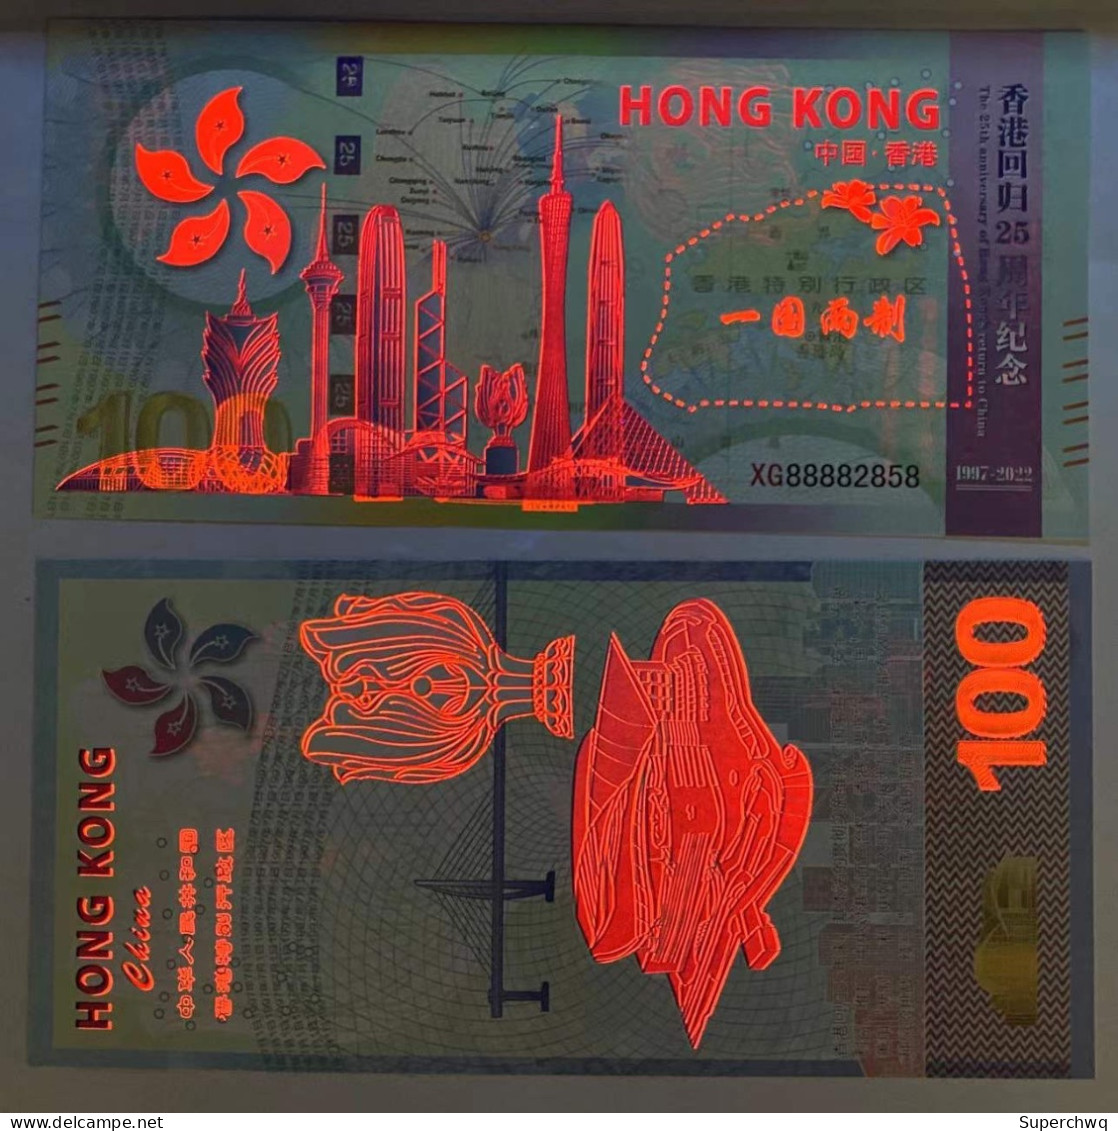 Banknote Collection，Fluorescent Banknotes For The 25th Anniversary Commemorative Voucher Of Hong Kong's Return To China - Swasiland